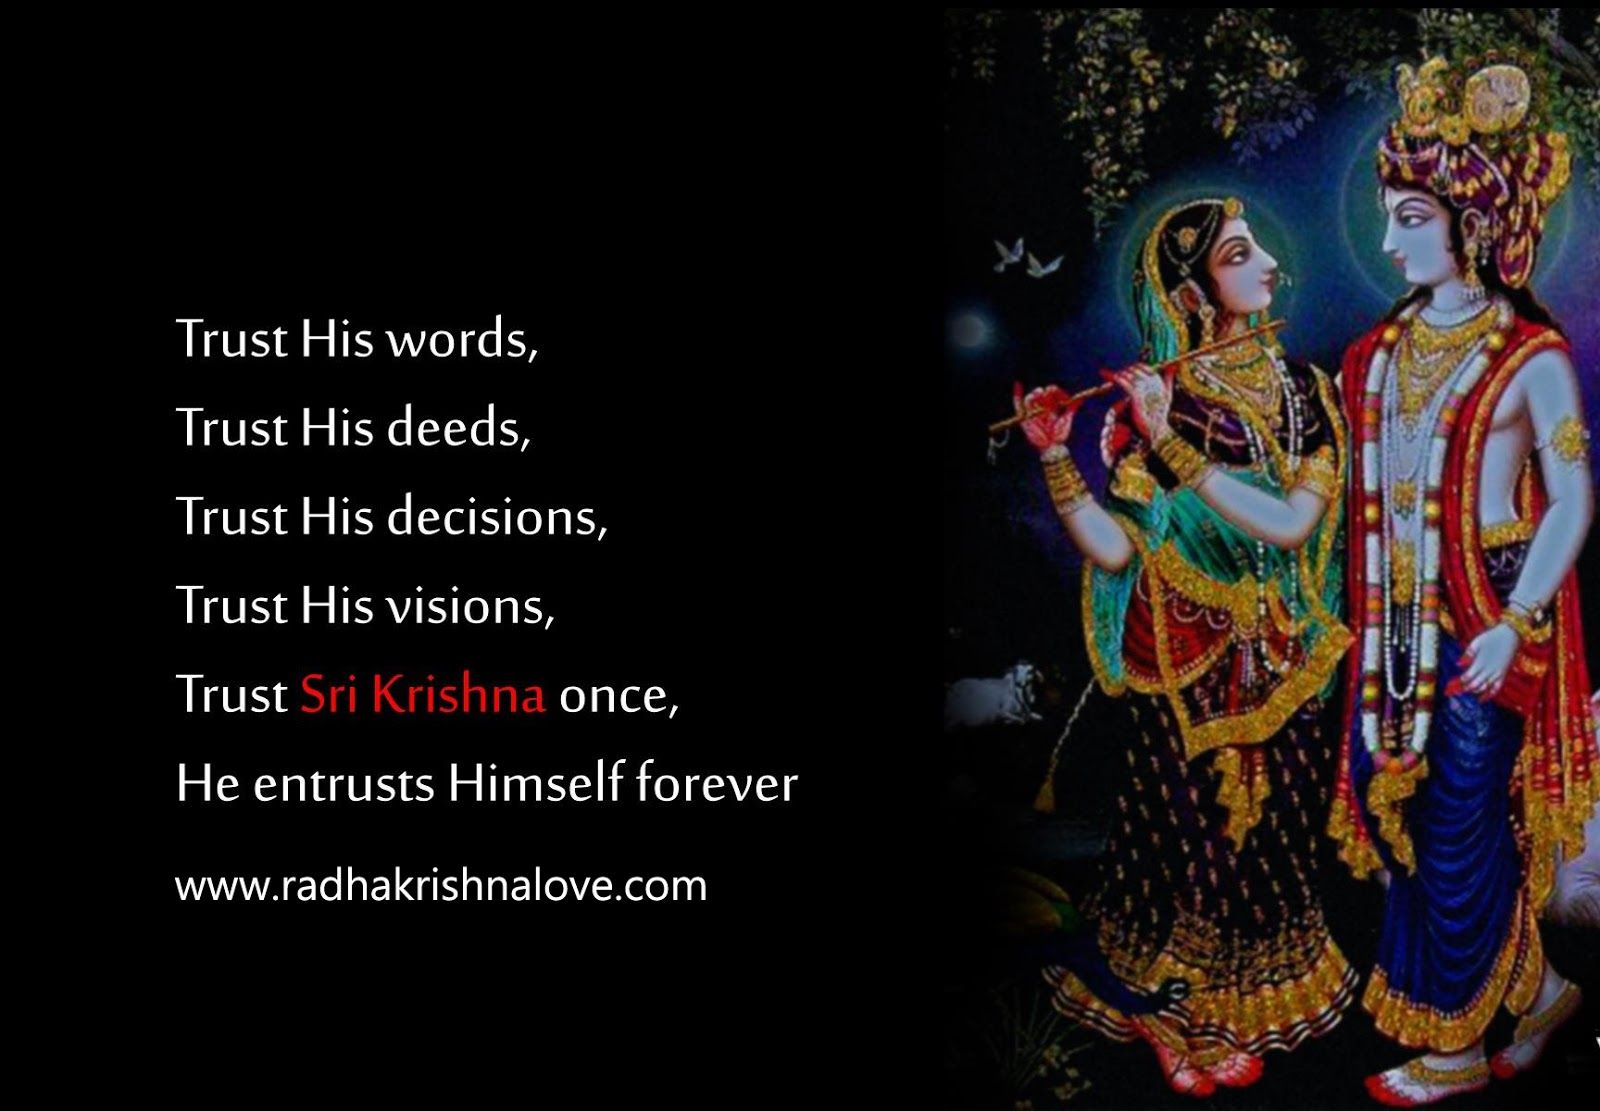 Radha Krishna Love Quotes In English. Love quotes collection